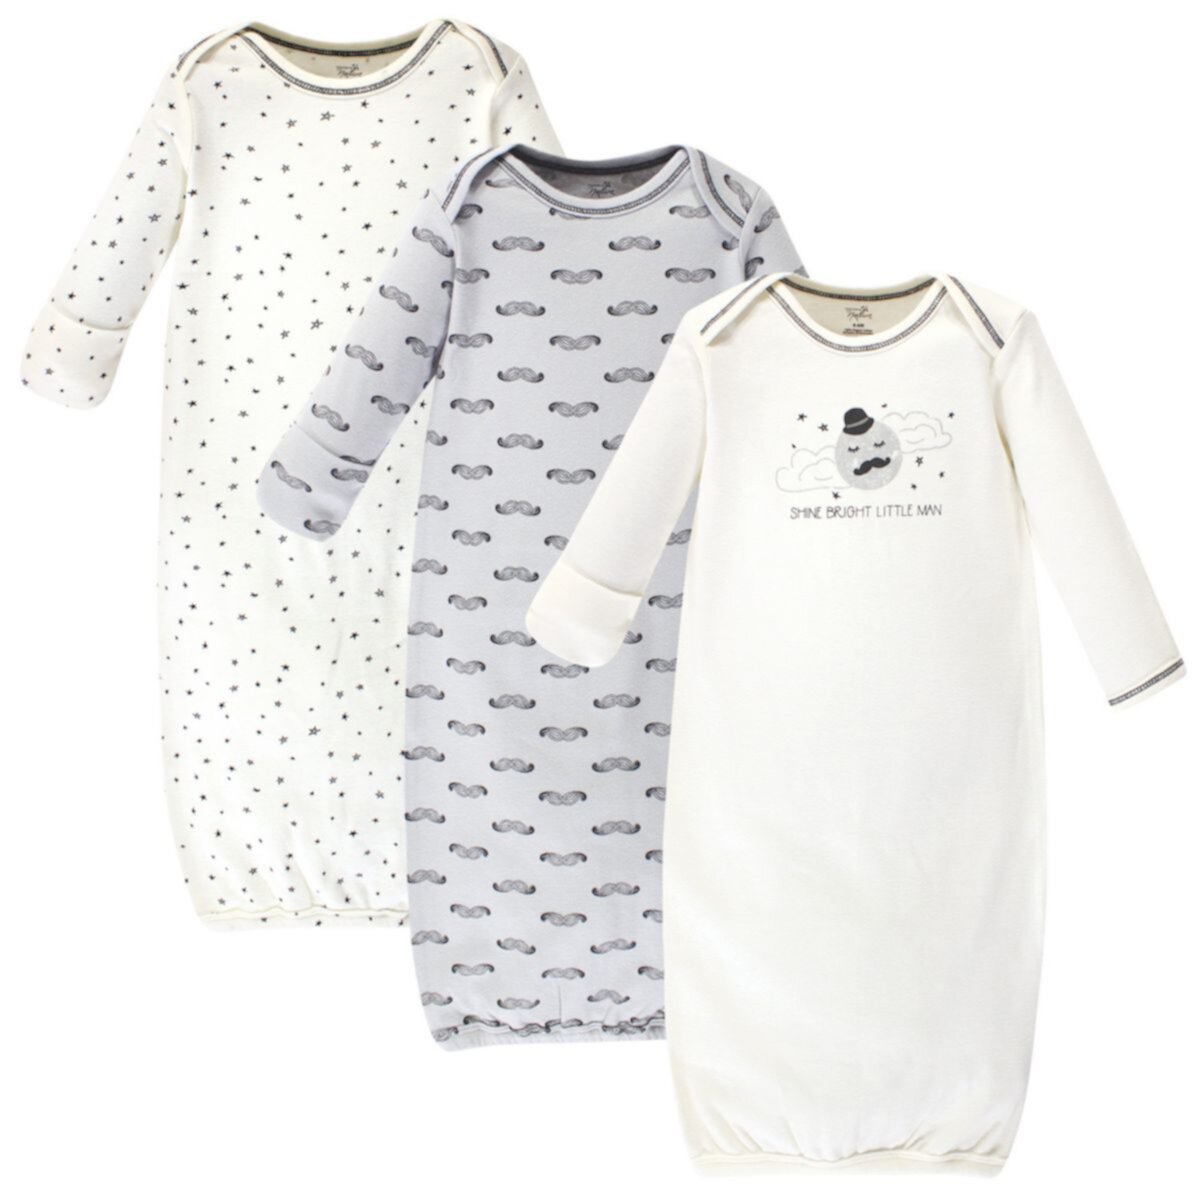 Baby Boy Organic Cotton Long-Sleeve Gowns 3pk, Mr. Moon Touched by Nature